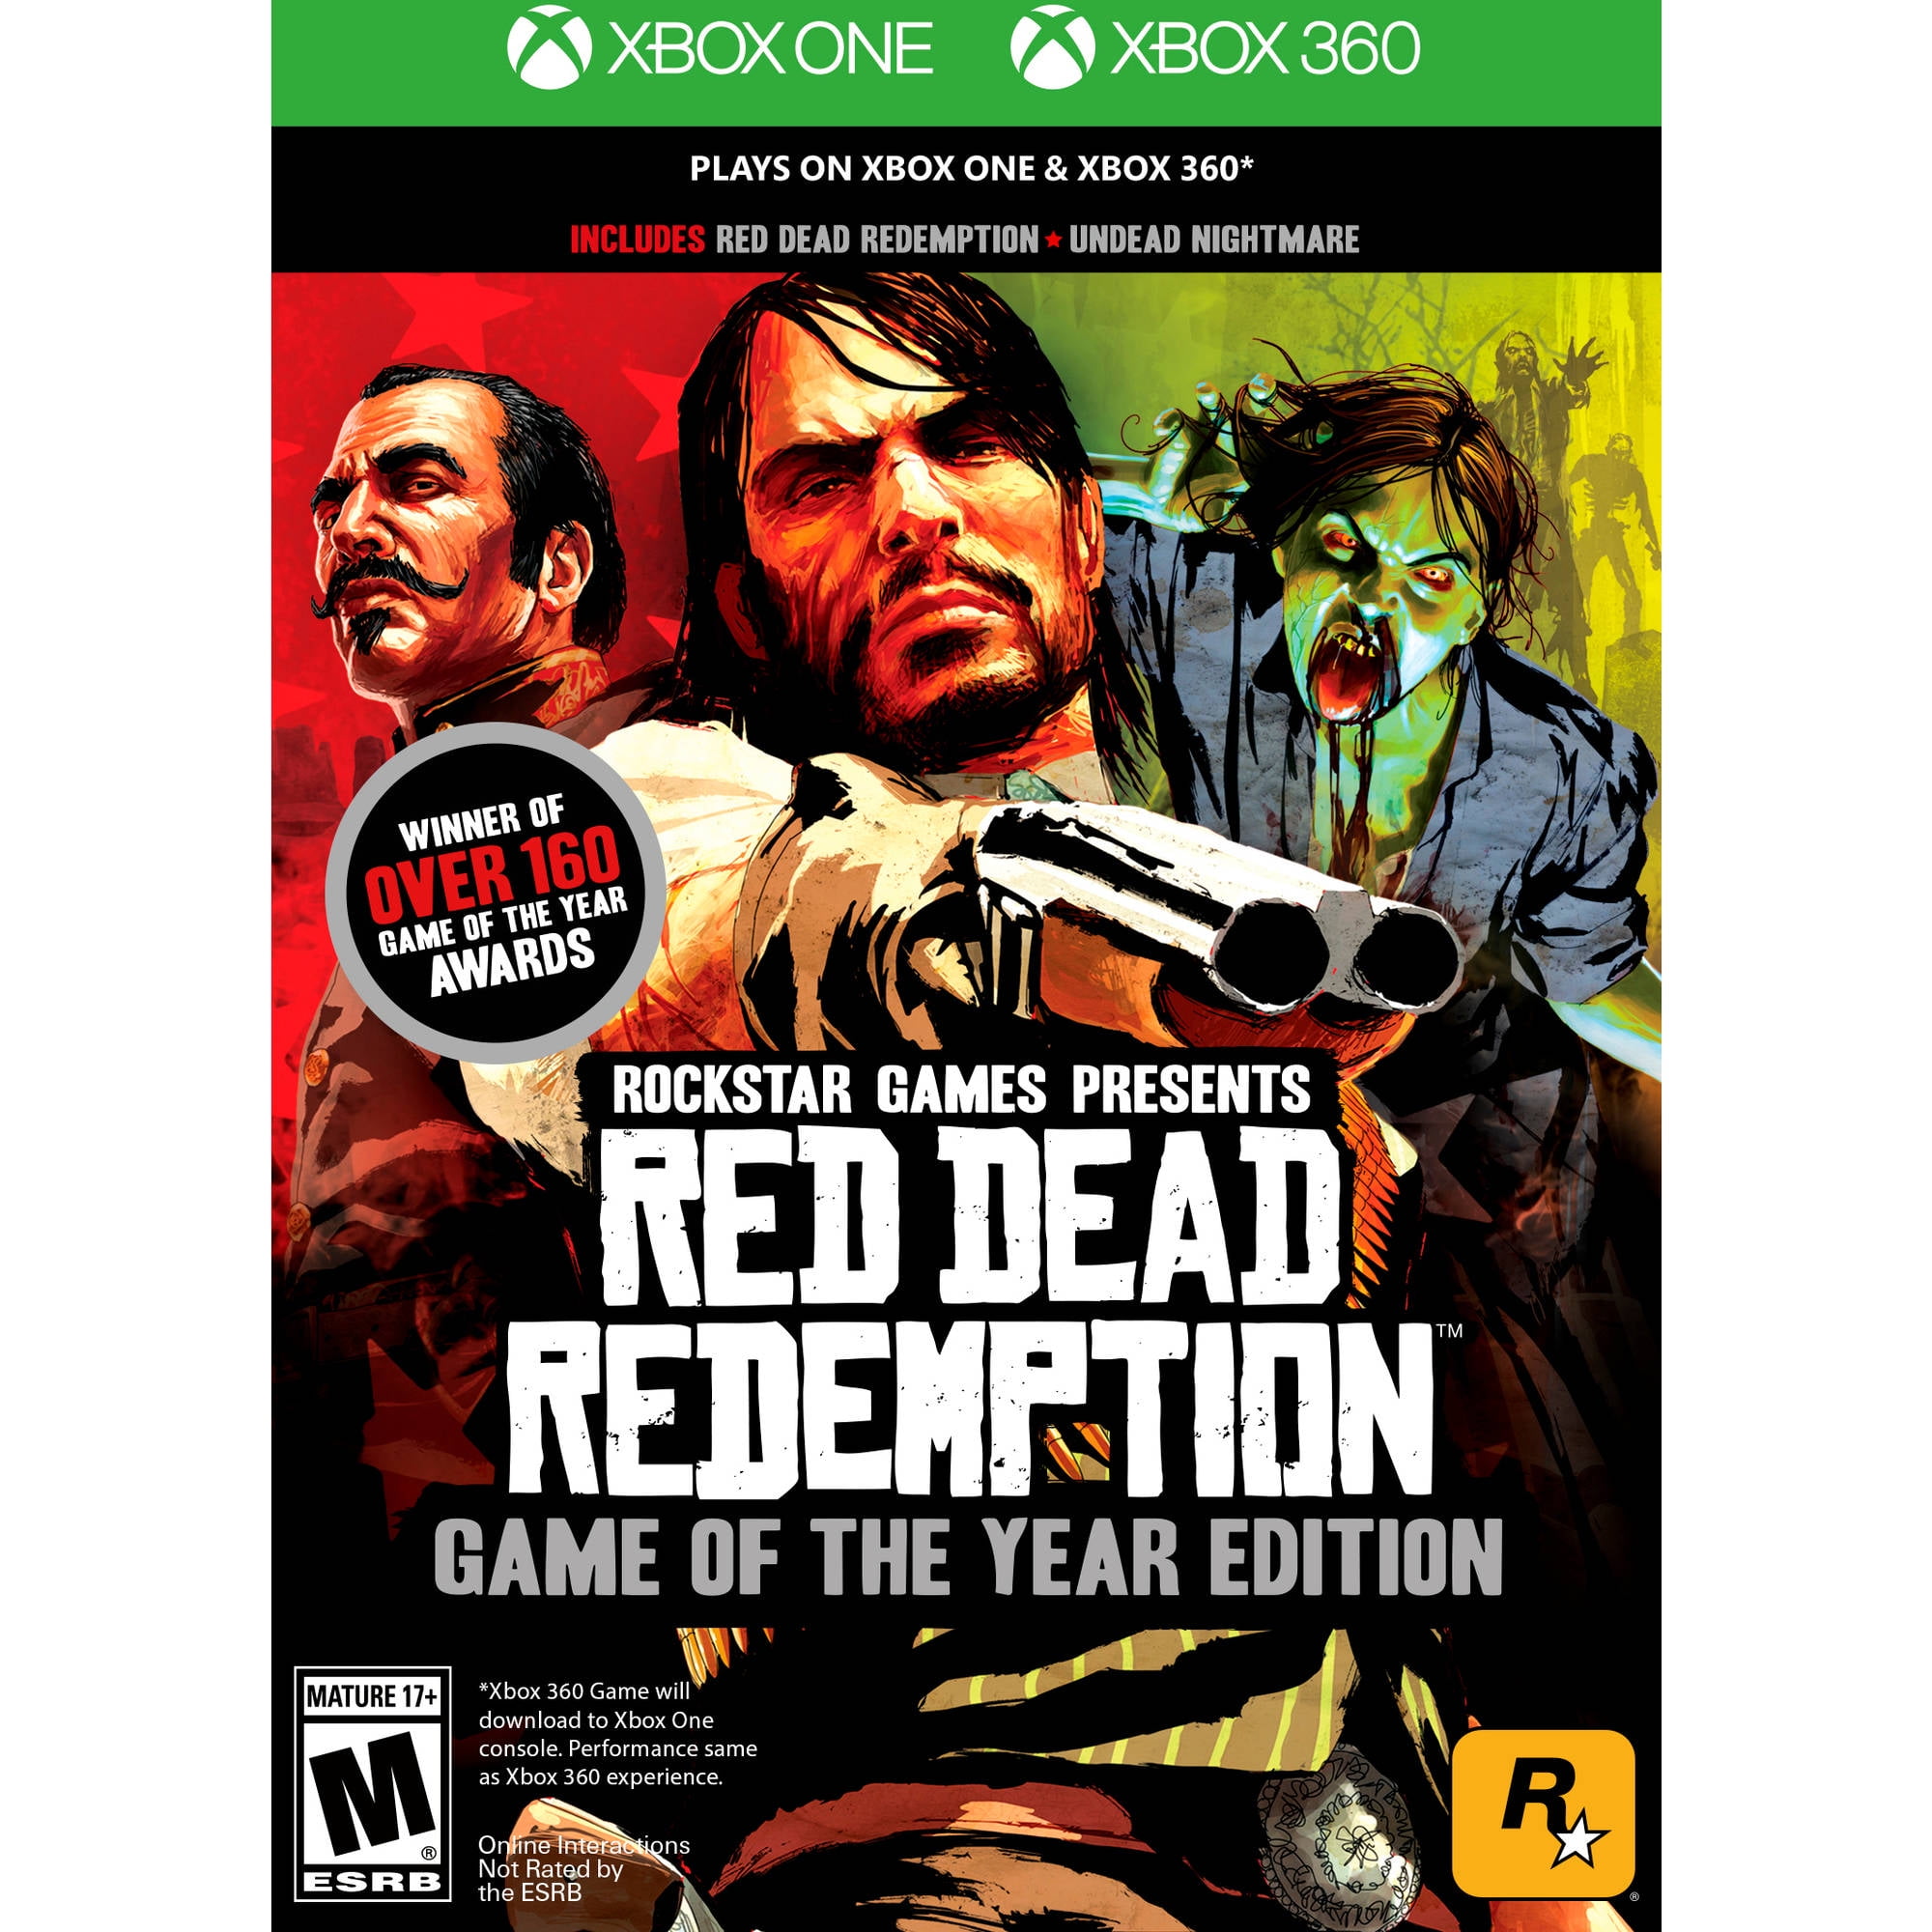 Red Dead Redemption Game Of The Year Edition Rockstar Games Xbox One 360 710425490071 Walmart Com Walmart Com